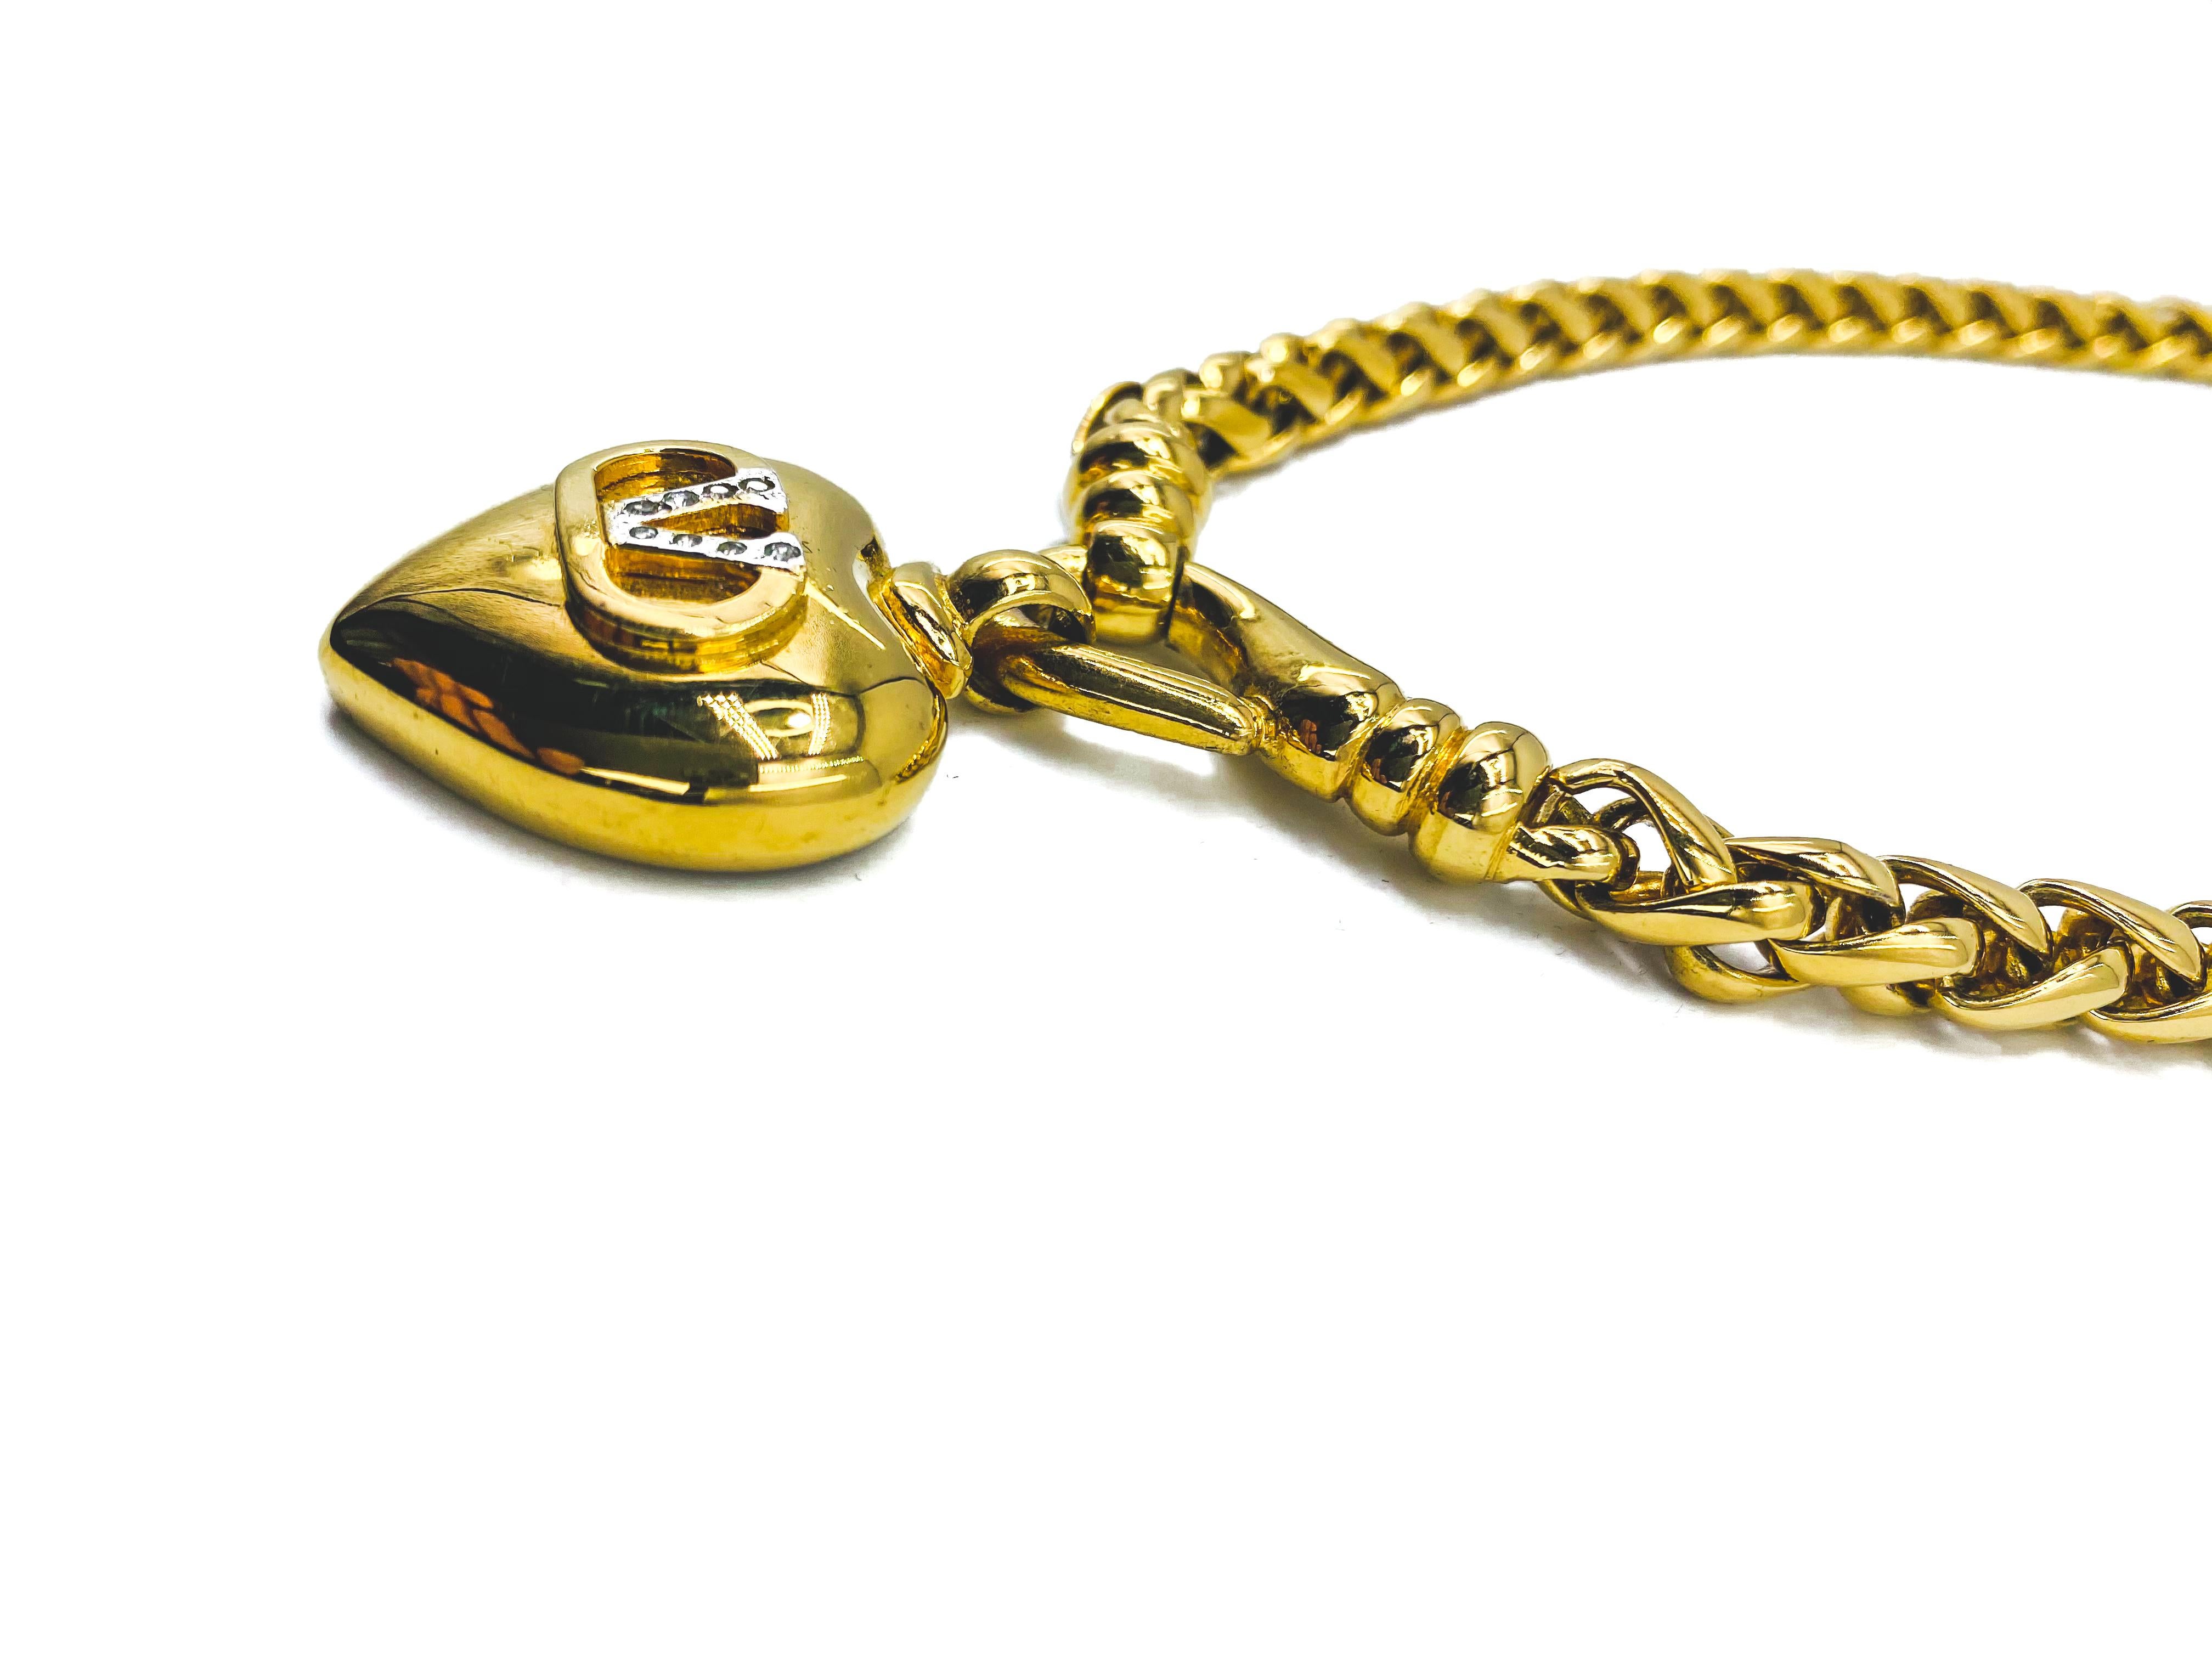 Valentino Vintage 1990s Chunky Heart Necklace

Stunning gold plated chunky chain necklace from the 90s Valentino archive

Detail
-Made in Italy in the 1990s
-Crafted from gold plated metal
-Chunky curb chain with large heart shaped pendant featuring